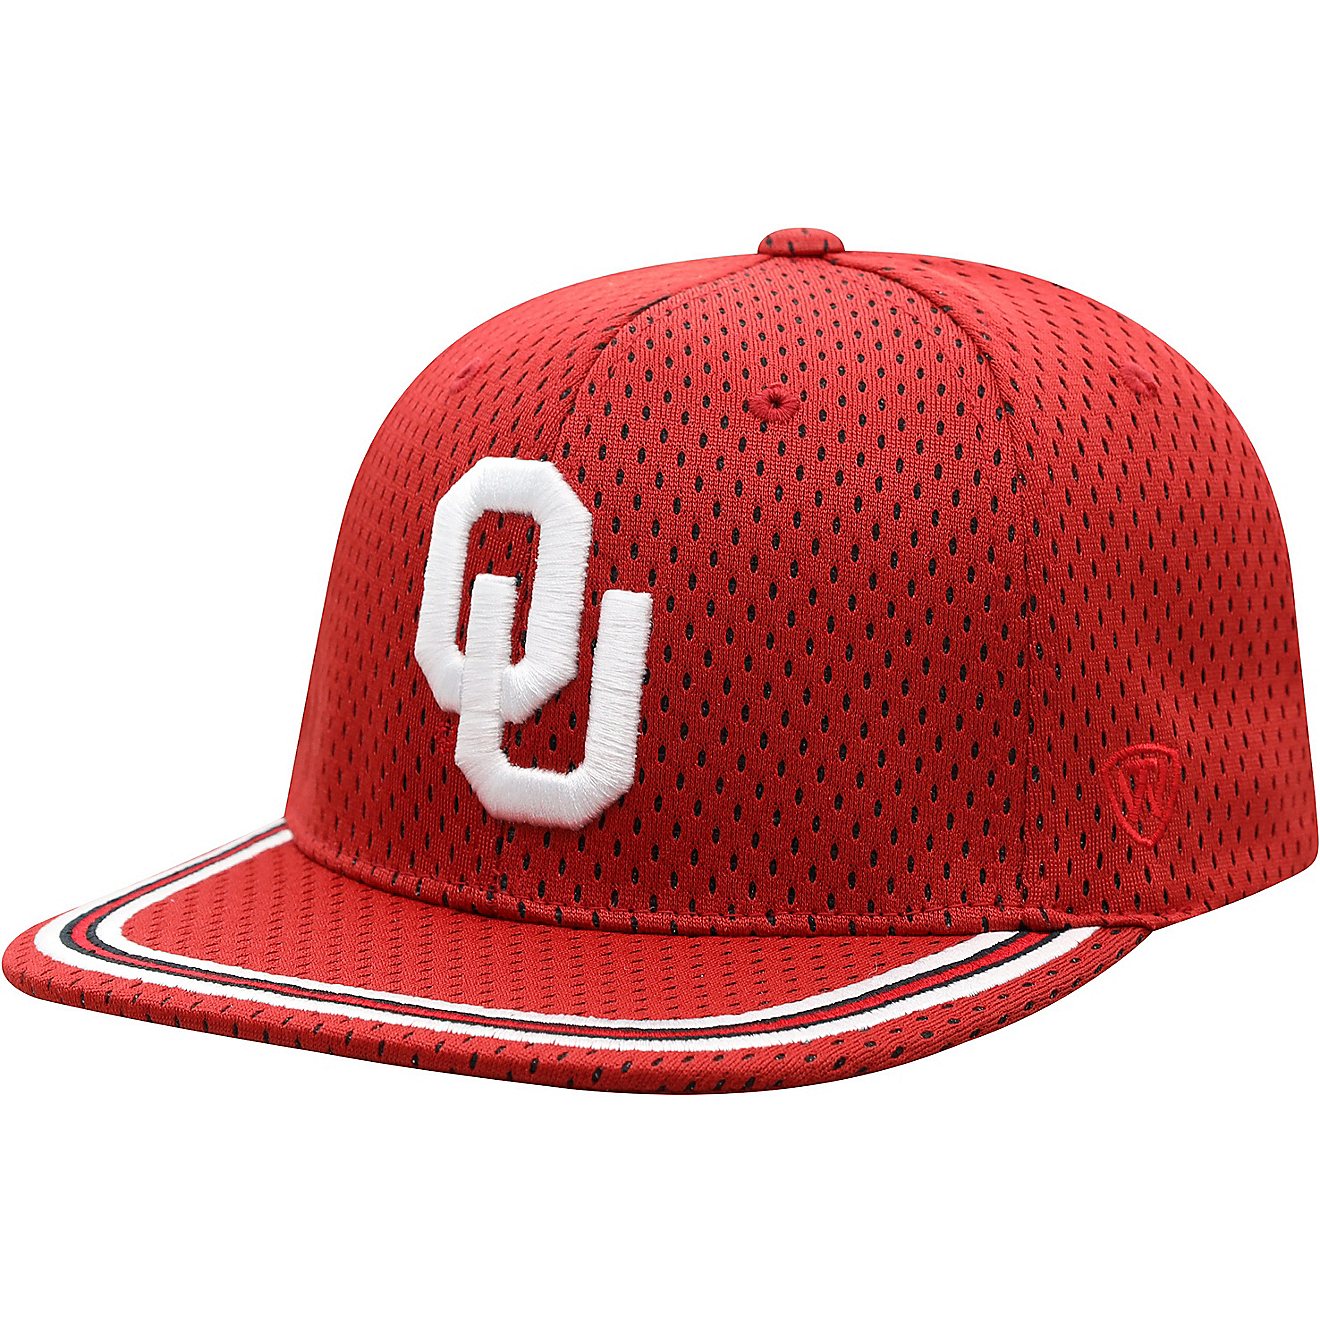 Top of the World Kids' University of Oklahoma Spiker Adjustable Cap                                                              - view number 3